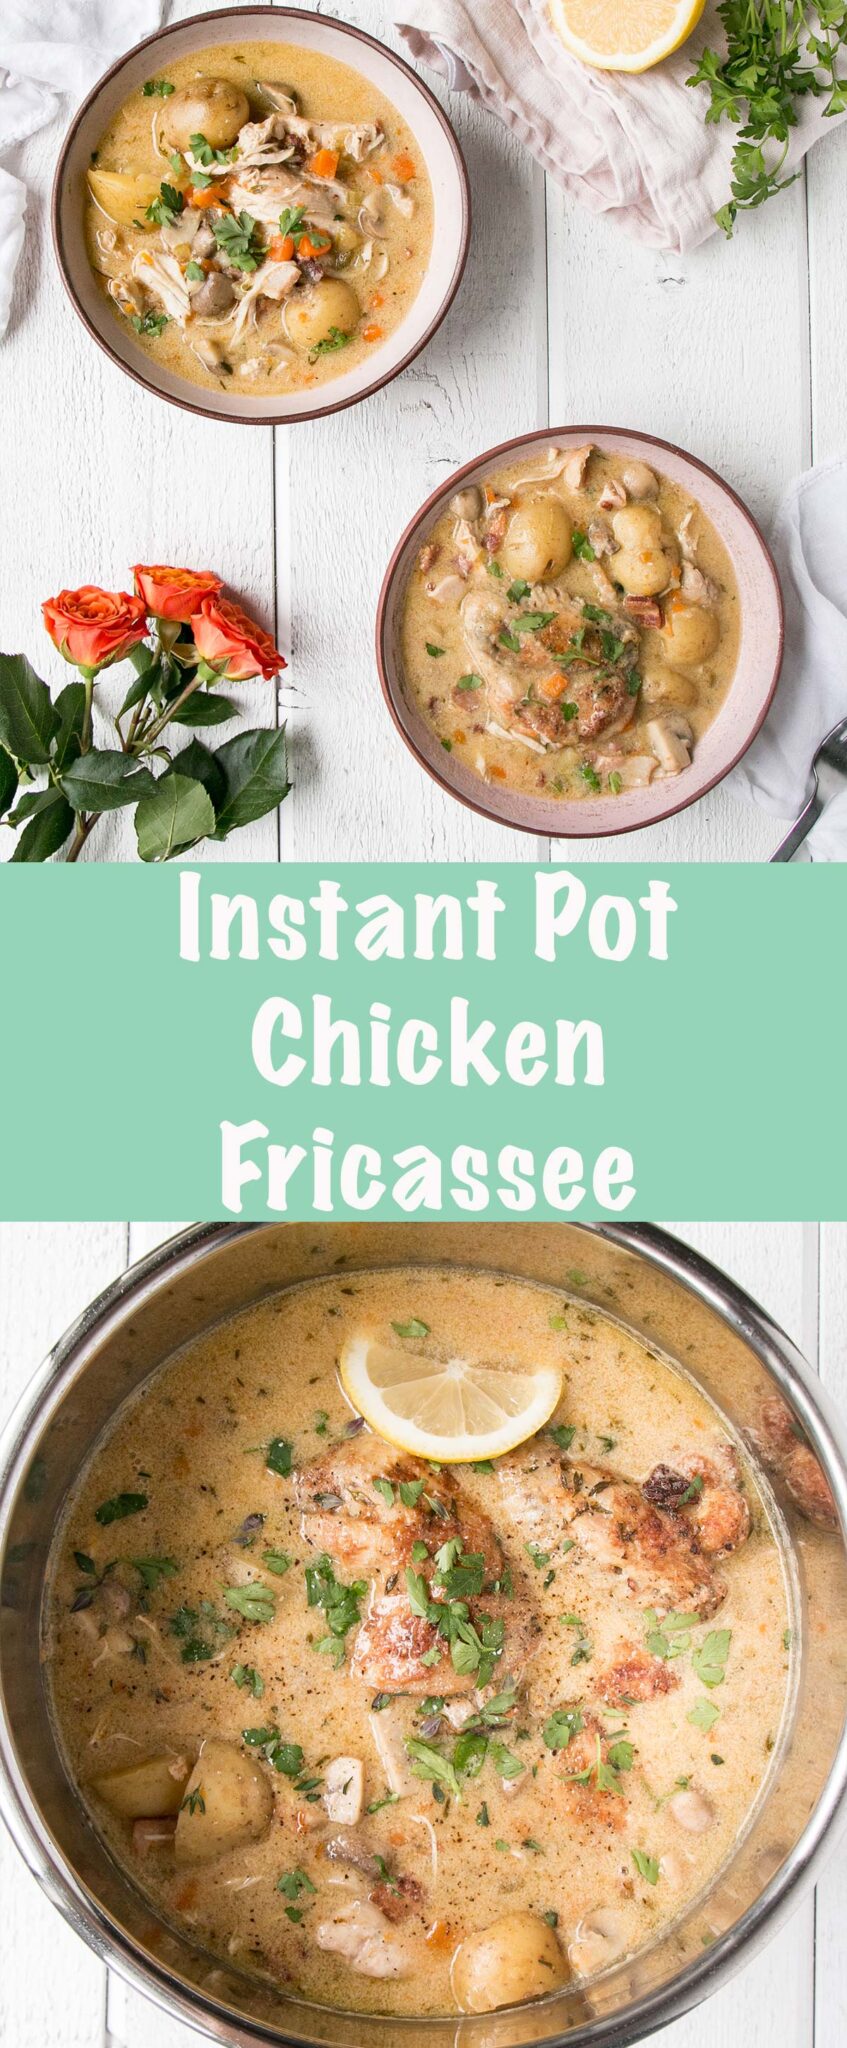 Instant Pot Chicken Fricassee is a classic French Chicken Stew made easy and quick thanks to the Instant Pot! Make fall-off the bone tender Instant Pot Chicken Thighs in this comforting meal with a silky broth and hearty vegetables. via @mykitchenlove